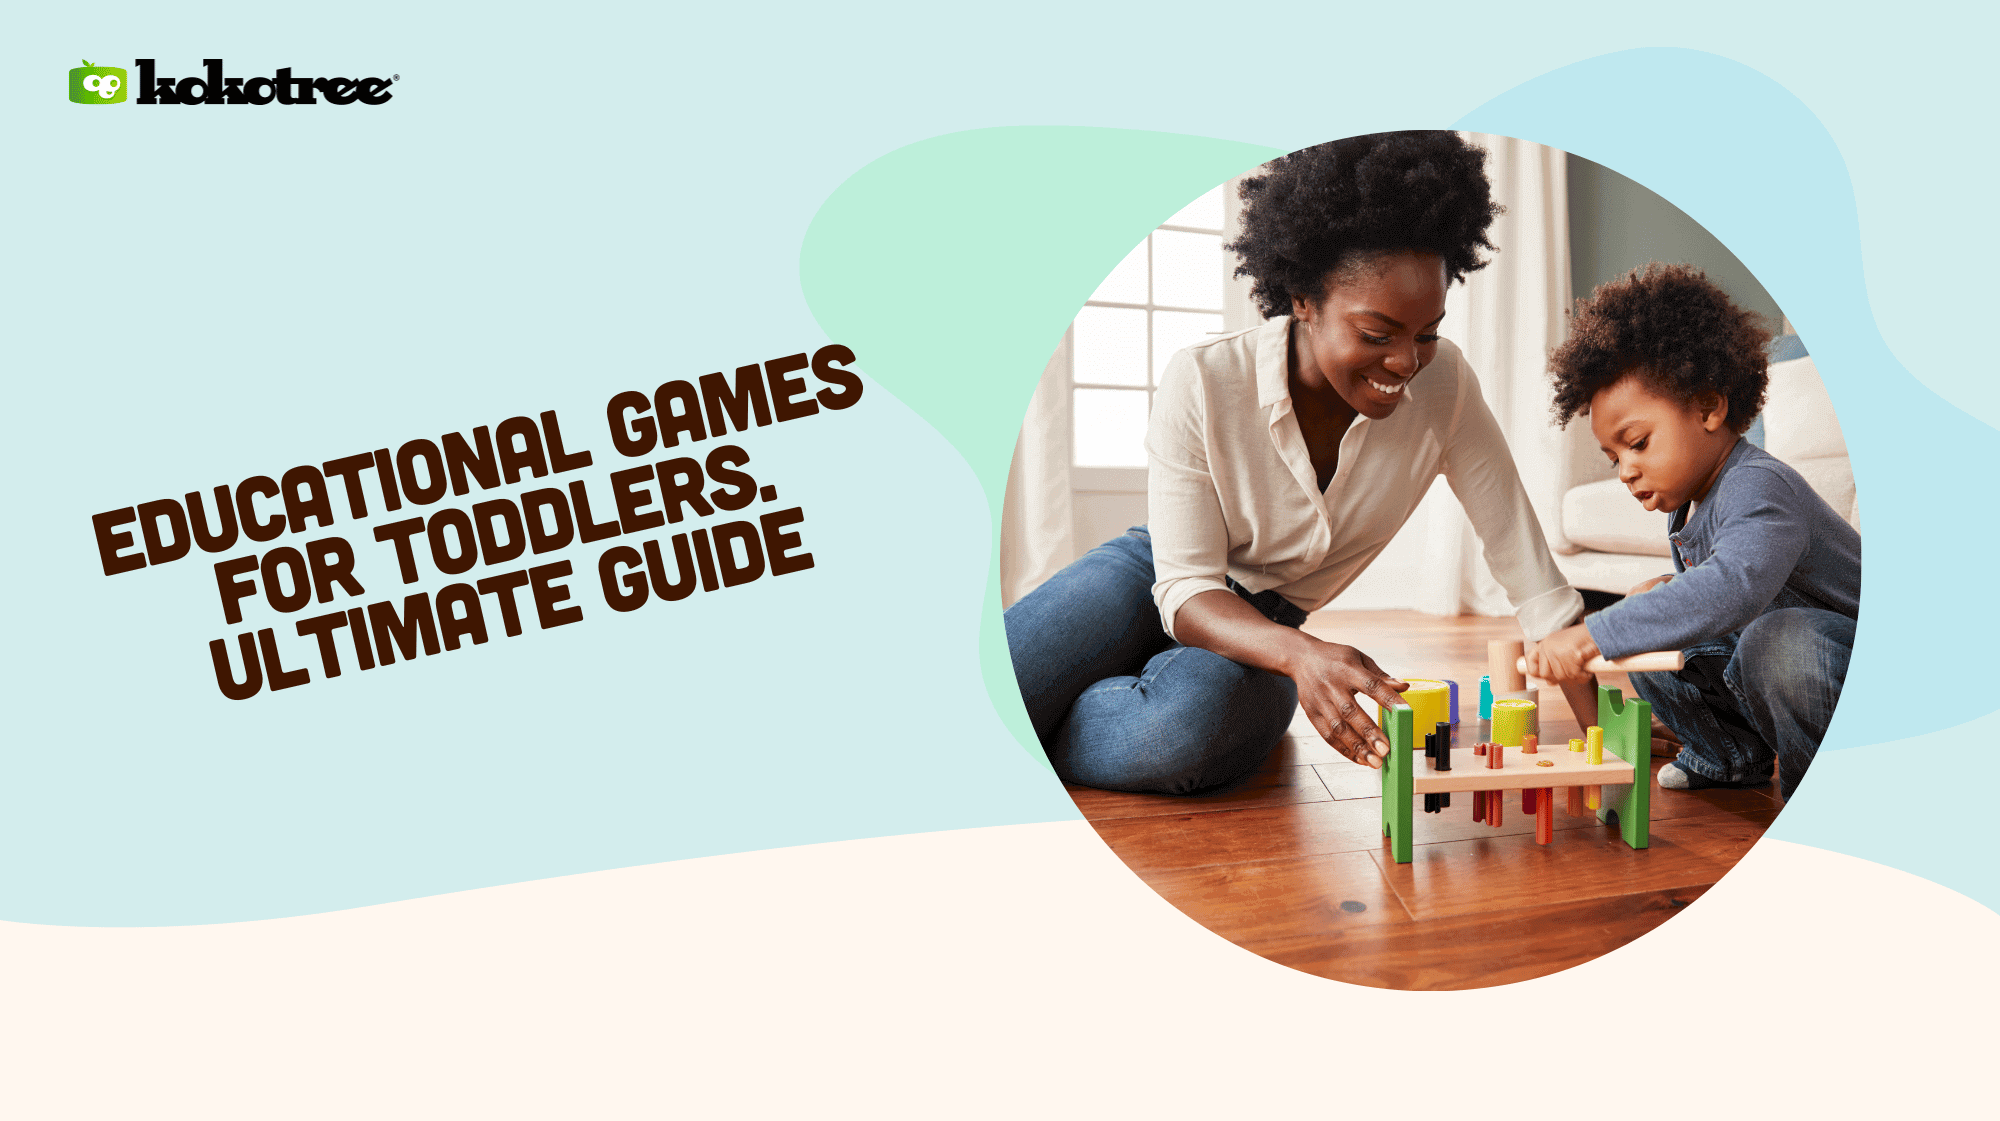 Educational Games for Toddlers. Ultimate Guide